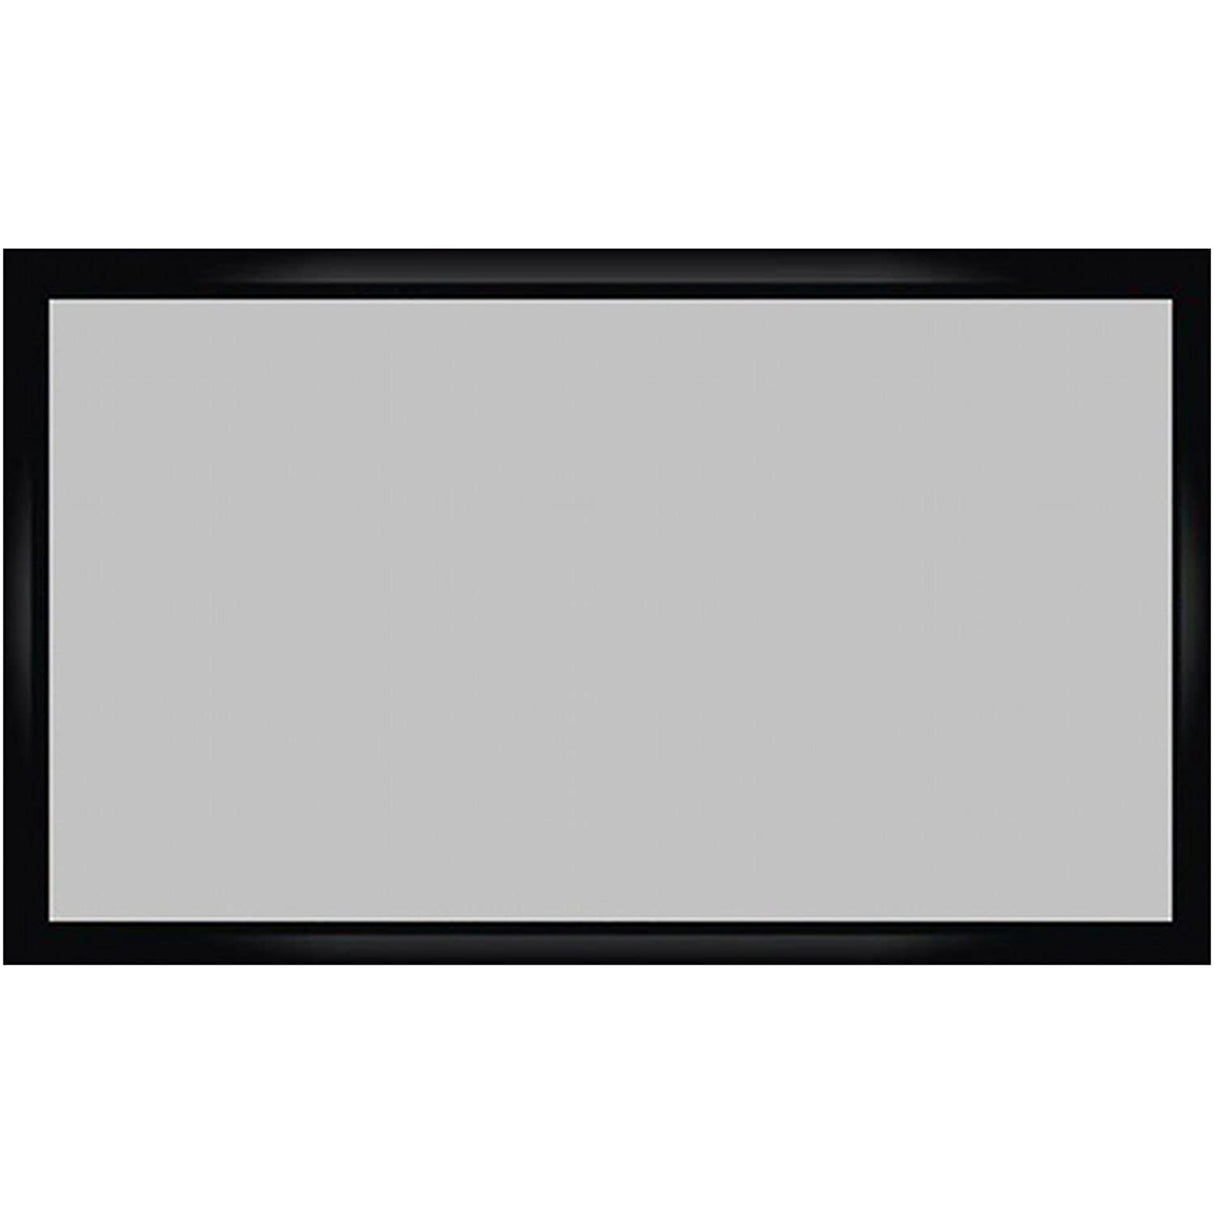 Prime Eco-line Grey Fabric Ambient Light Rejection (ALR) Flat Fixed Frame Projection Screen 92" (For Long Throw Projectors)